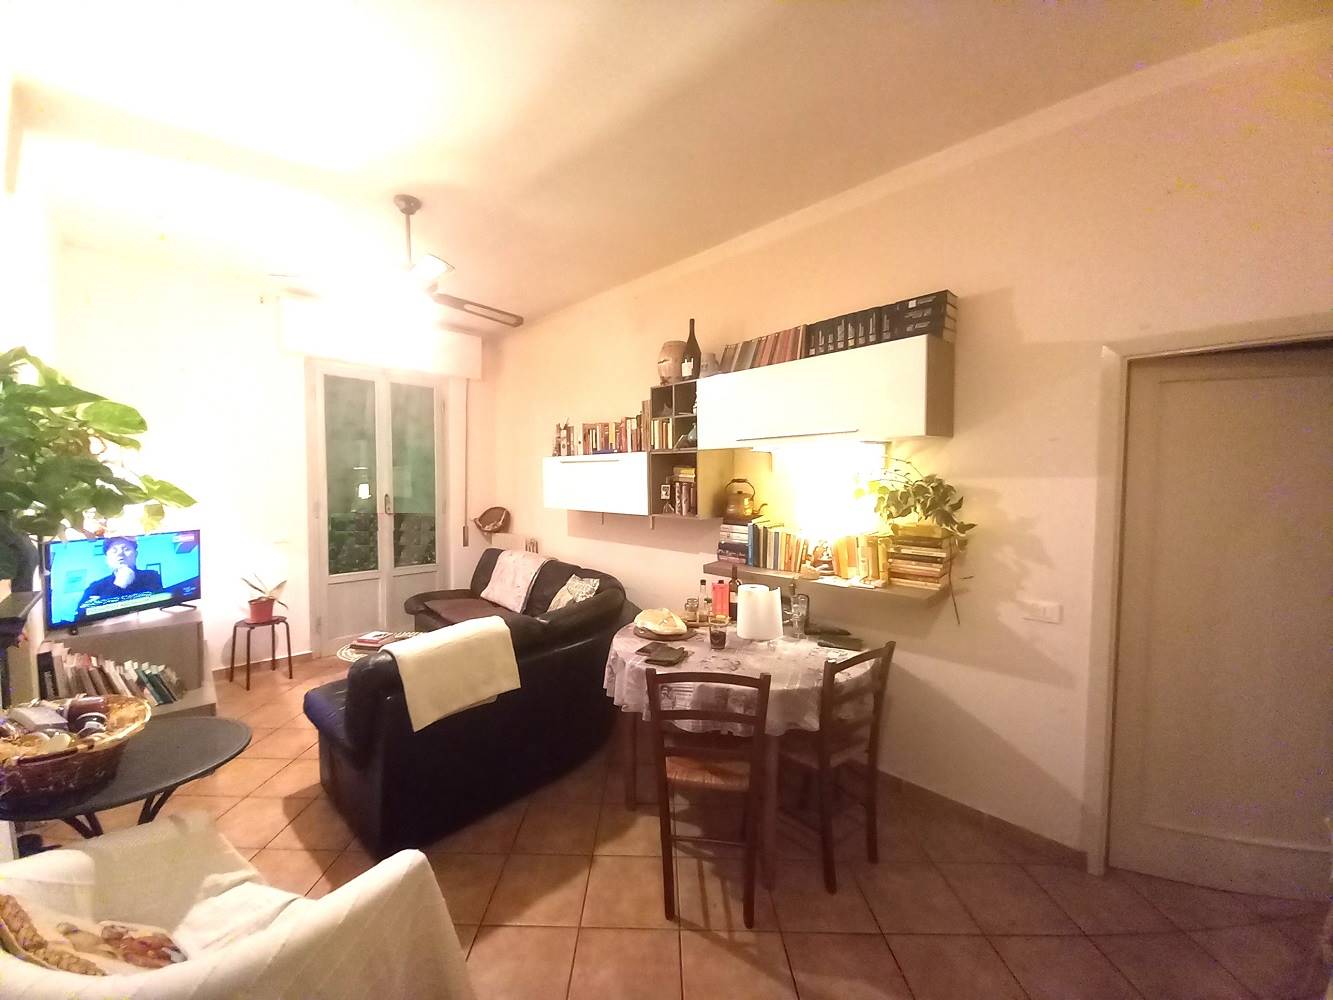 CENTRO FIGLINE, FIGLINE E INCISA VALDARNO, Apartment for sale of 103 Sq. mt., Habitable, Heating Individual heating system, Energetic class: G, 